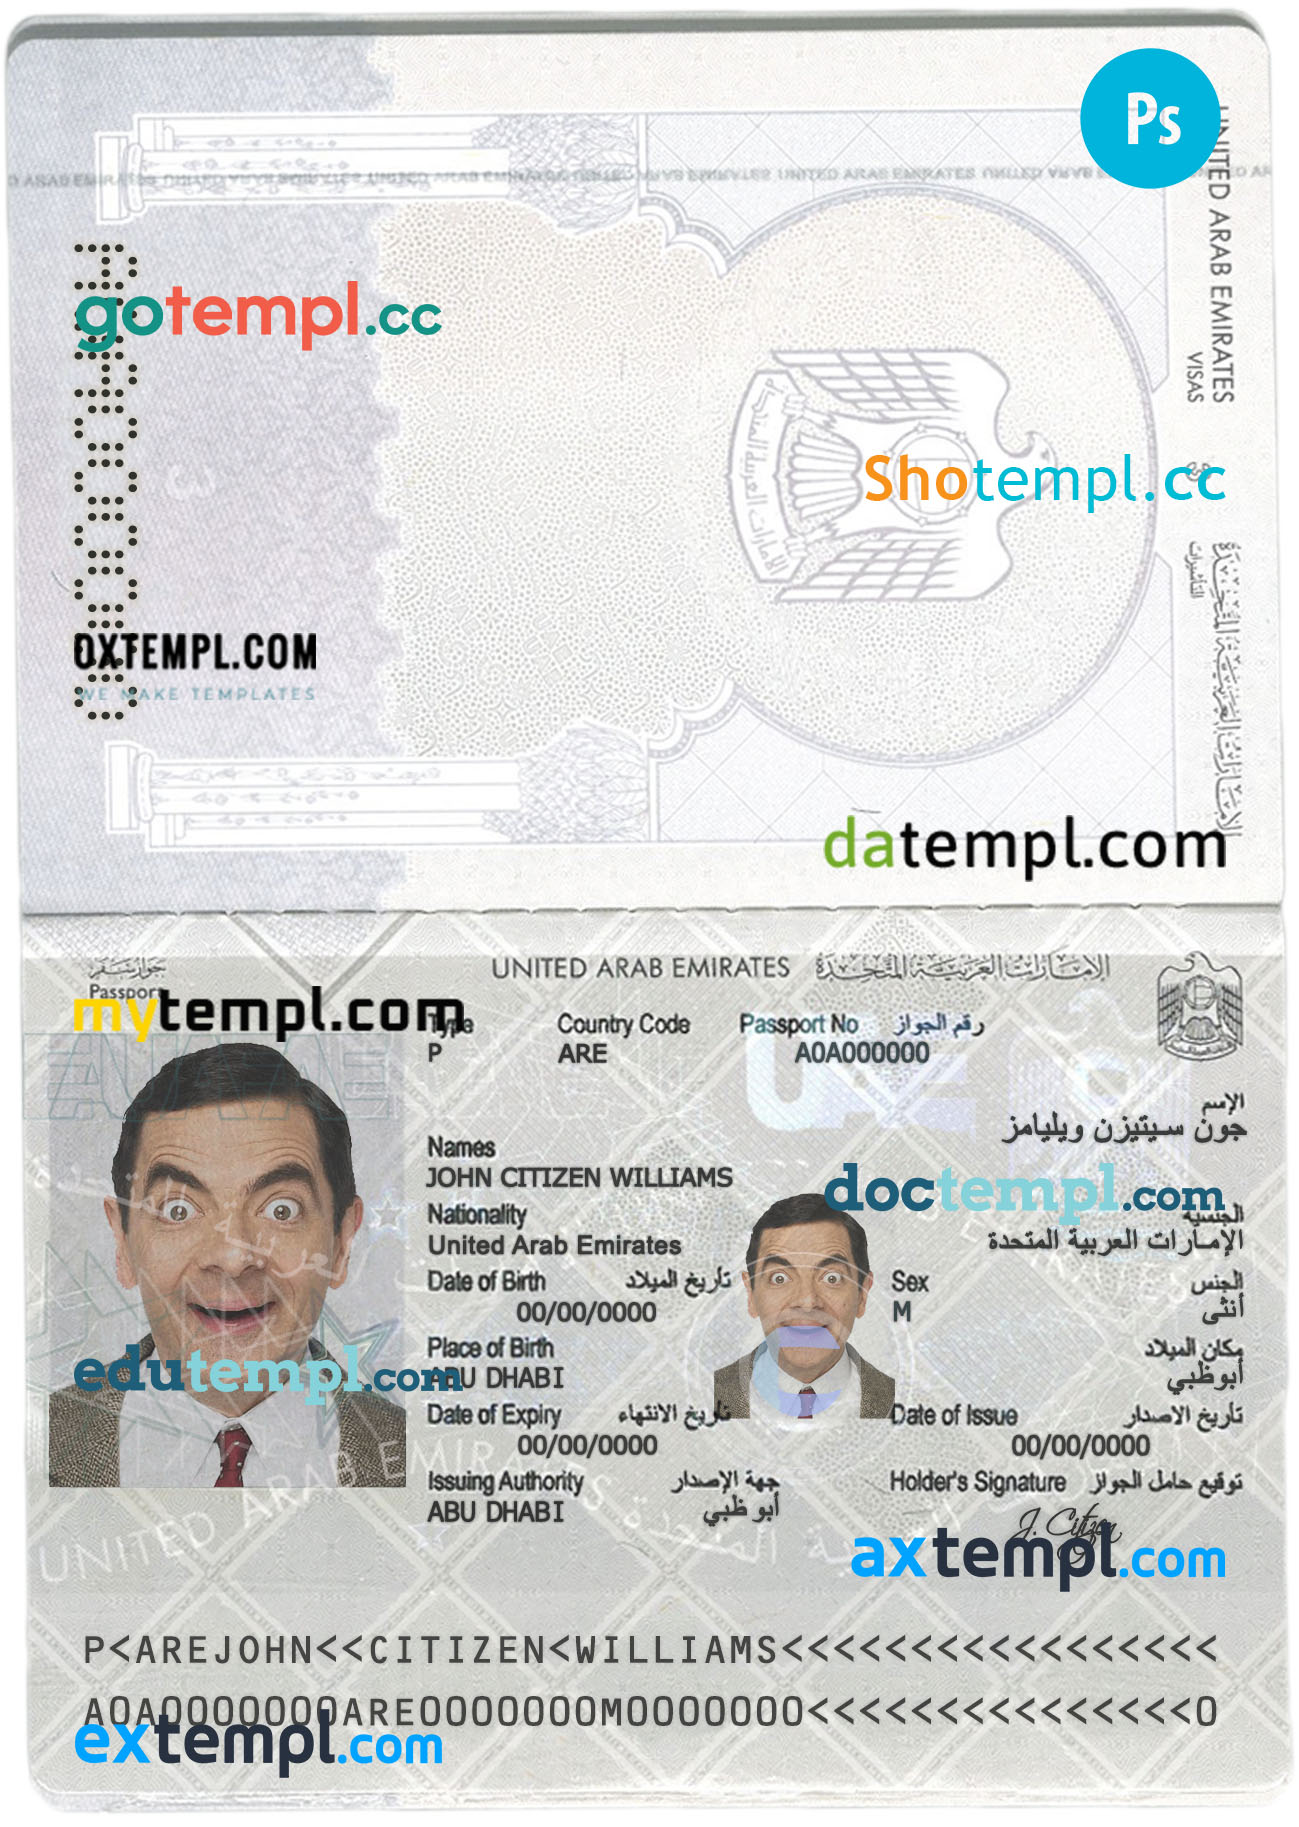 UAE passport PSD files, editable scan and photo-realistic look sample, 2 in 1